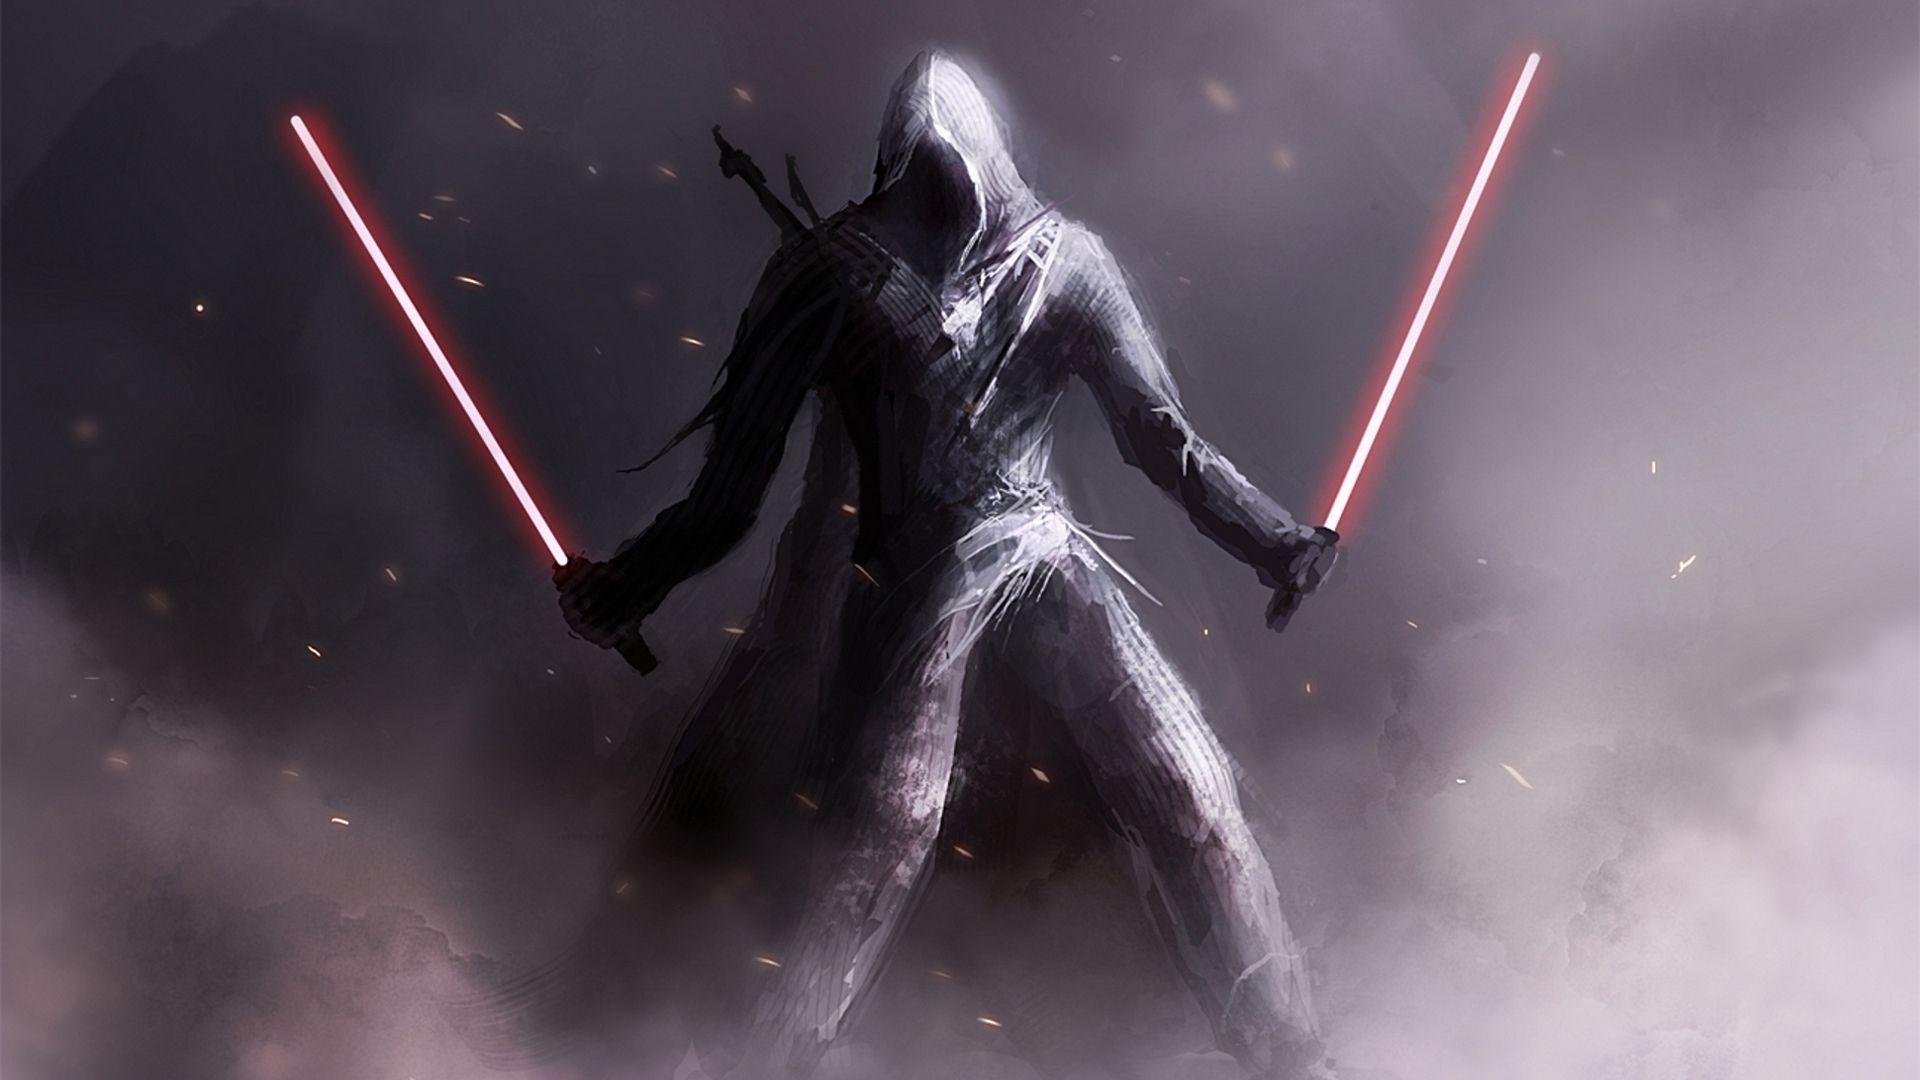 image For > Star Wars Sith Wallpaper 1920x1080